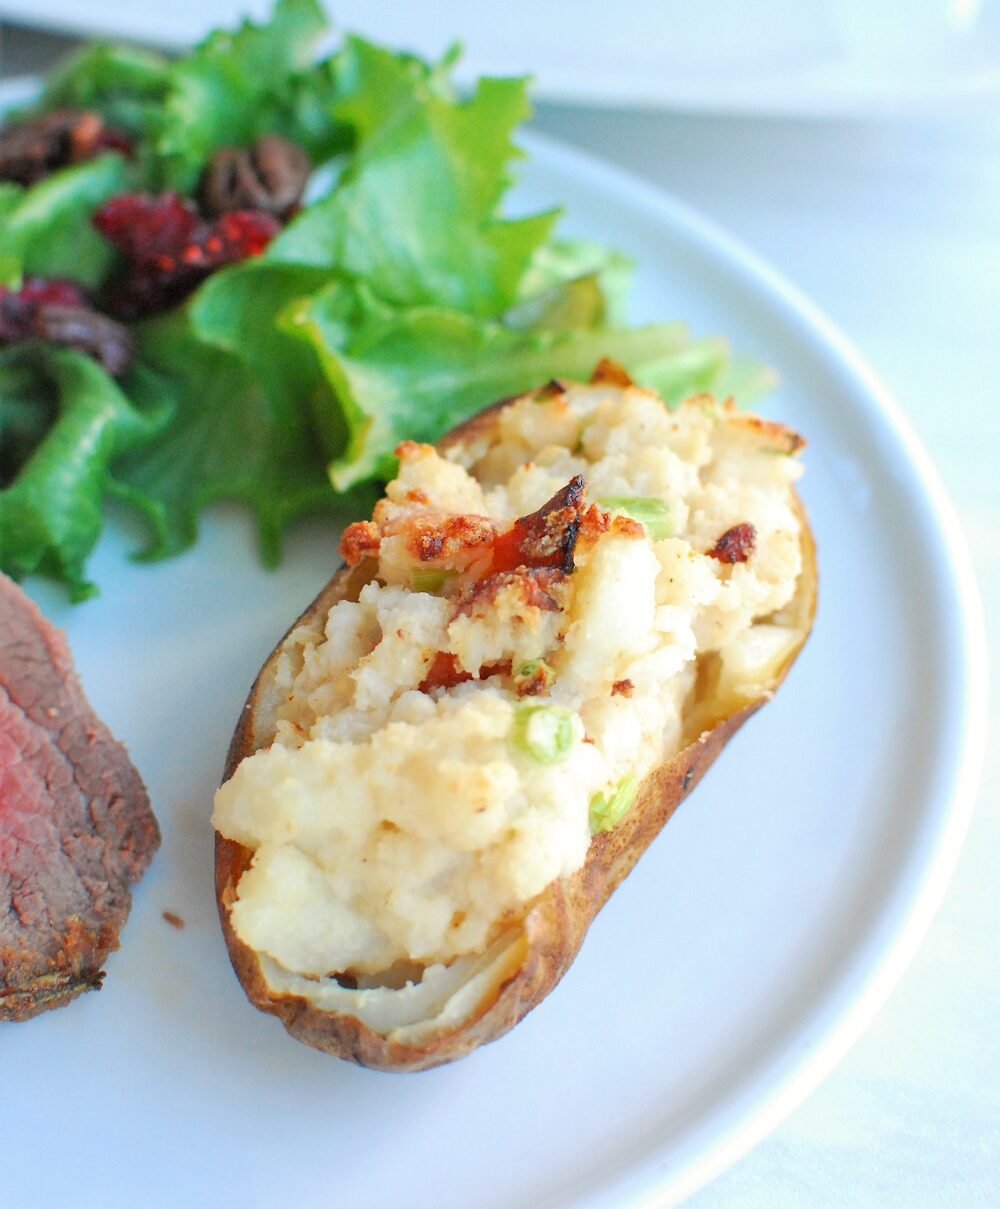 a twice baked potato on a white plate next to a piece of steak and a salad